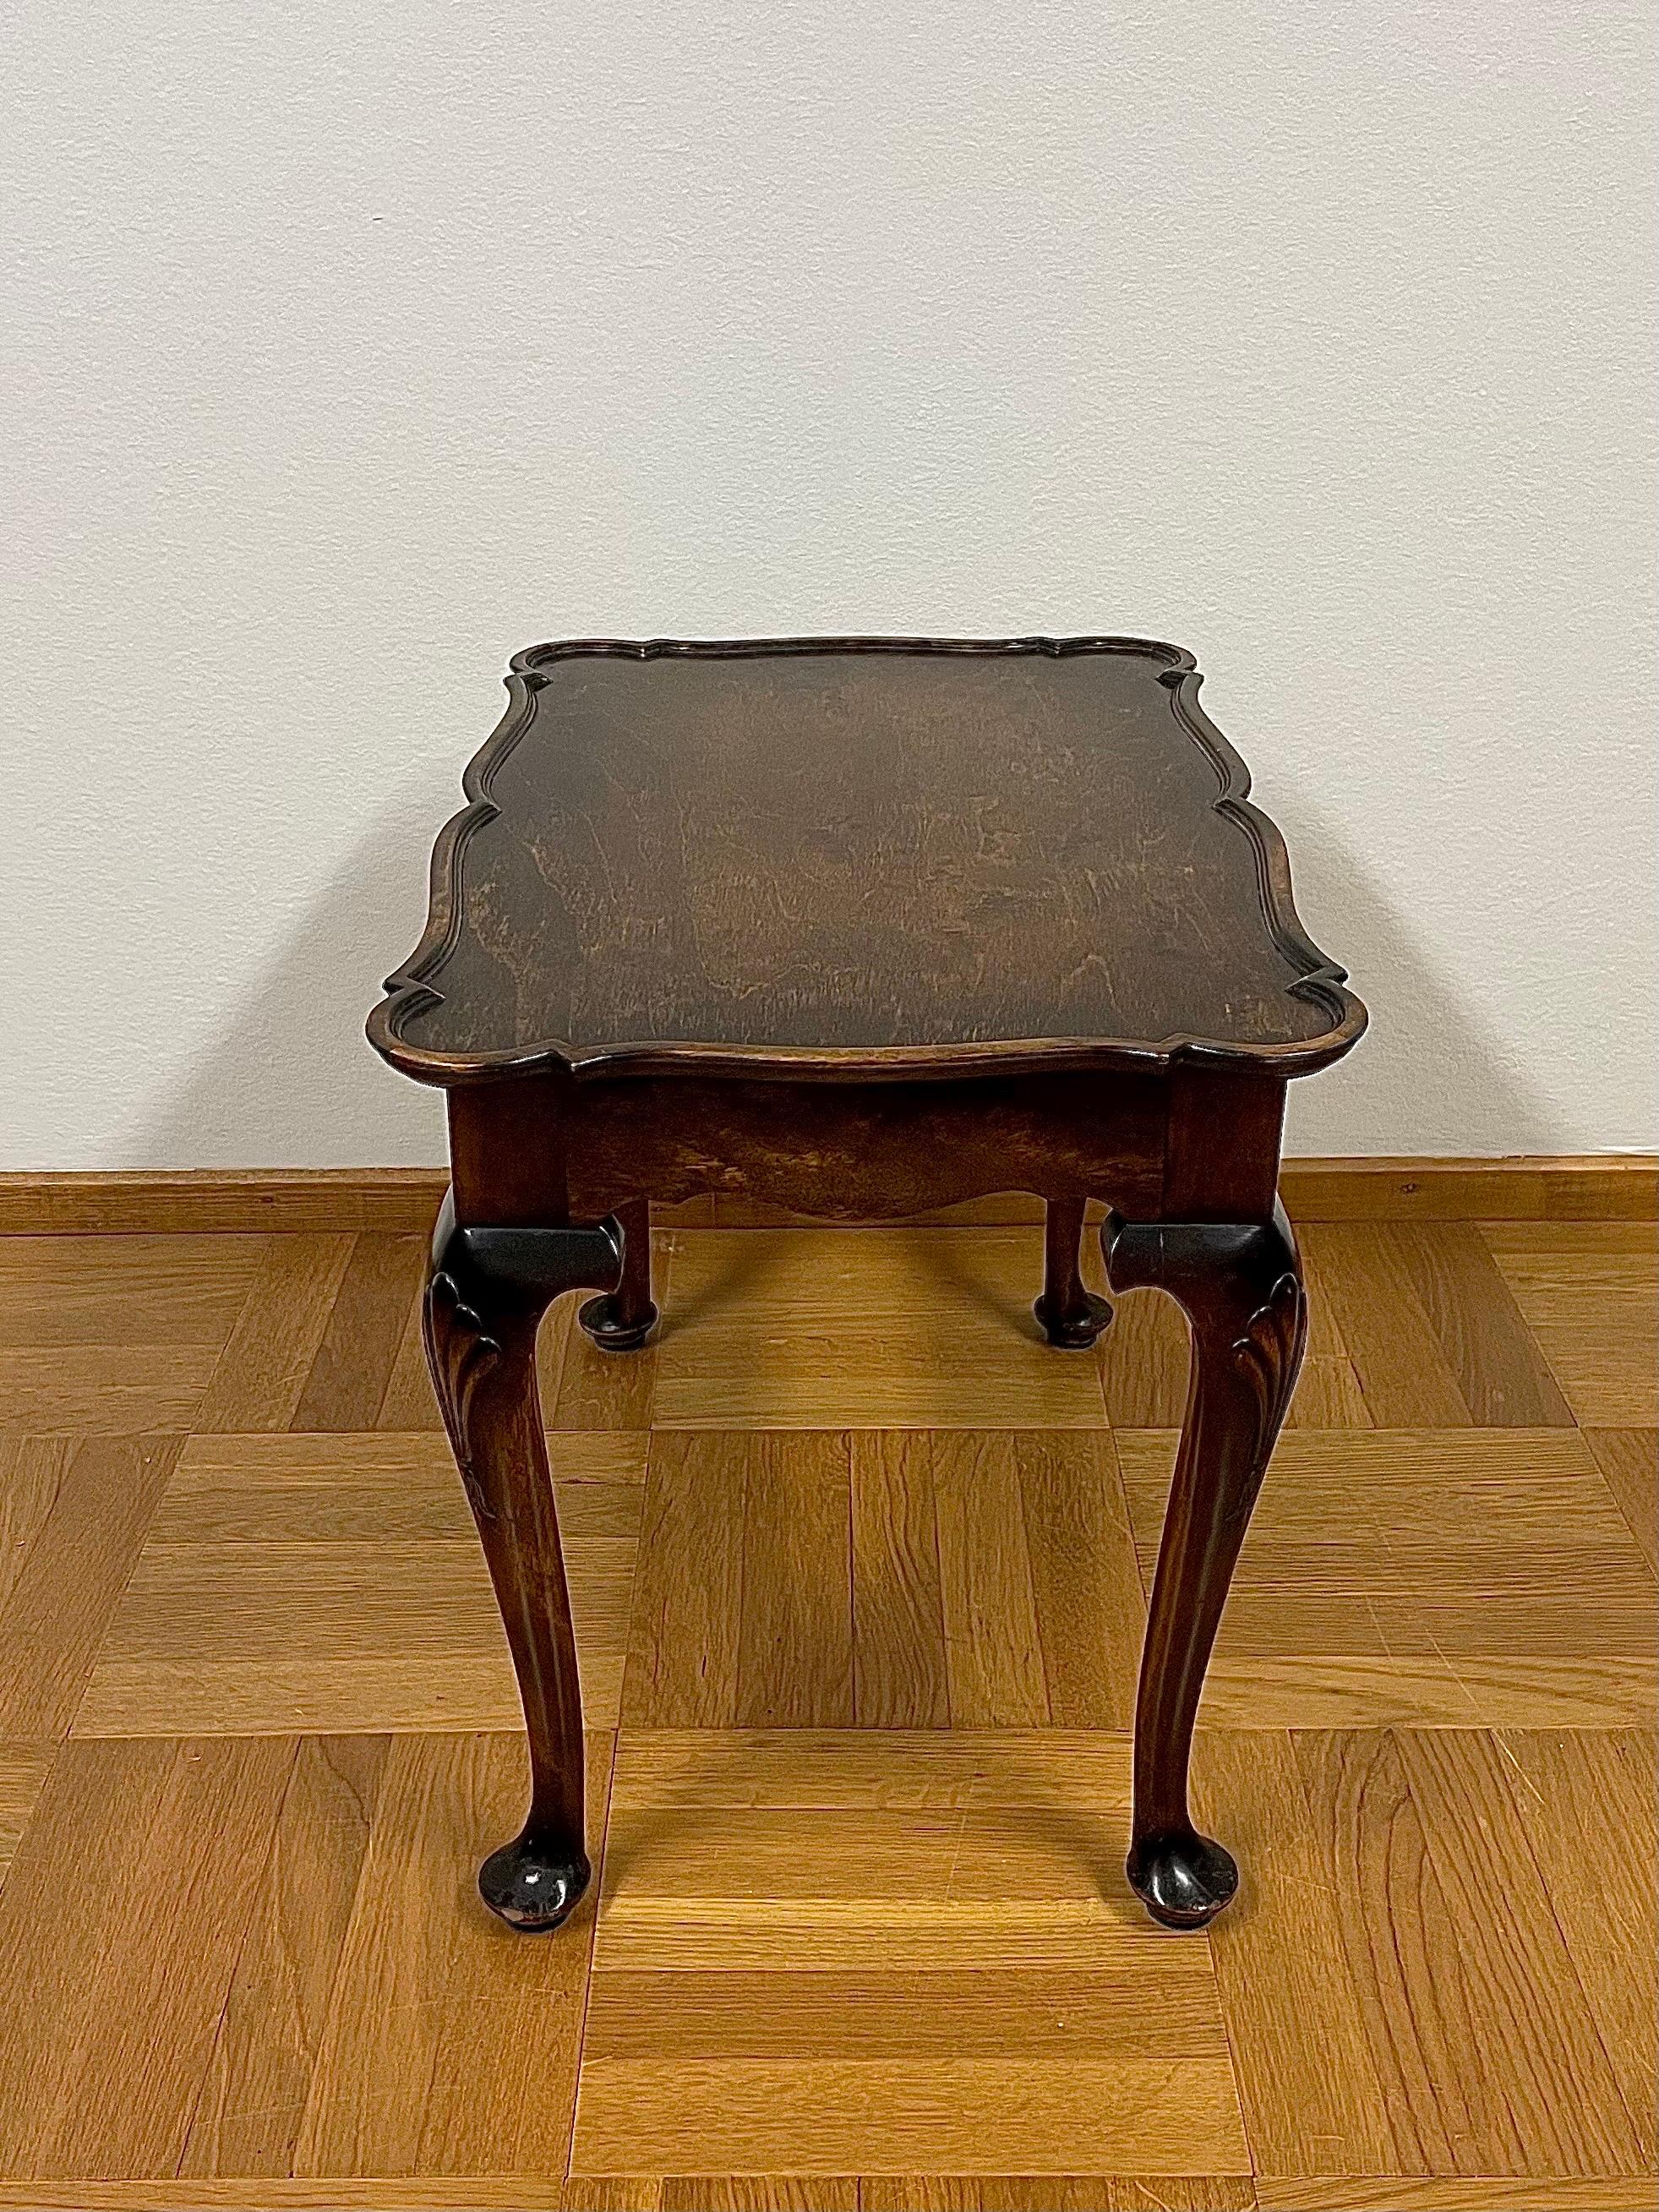 Early 20th Century Swedish Tray Table in Stained Birch Manufactured 13/3 1929 by Nordiska Kompaniet For Sale